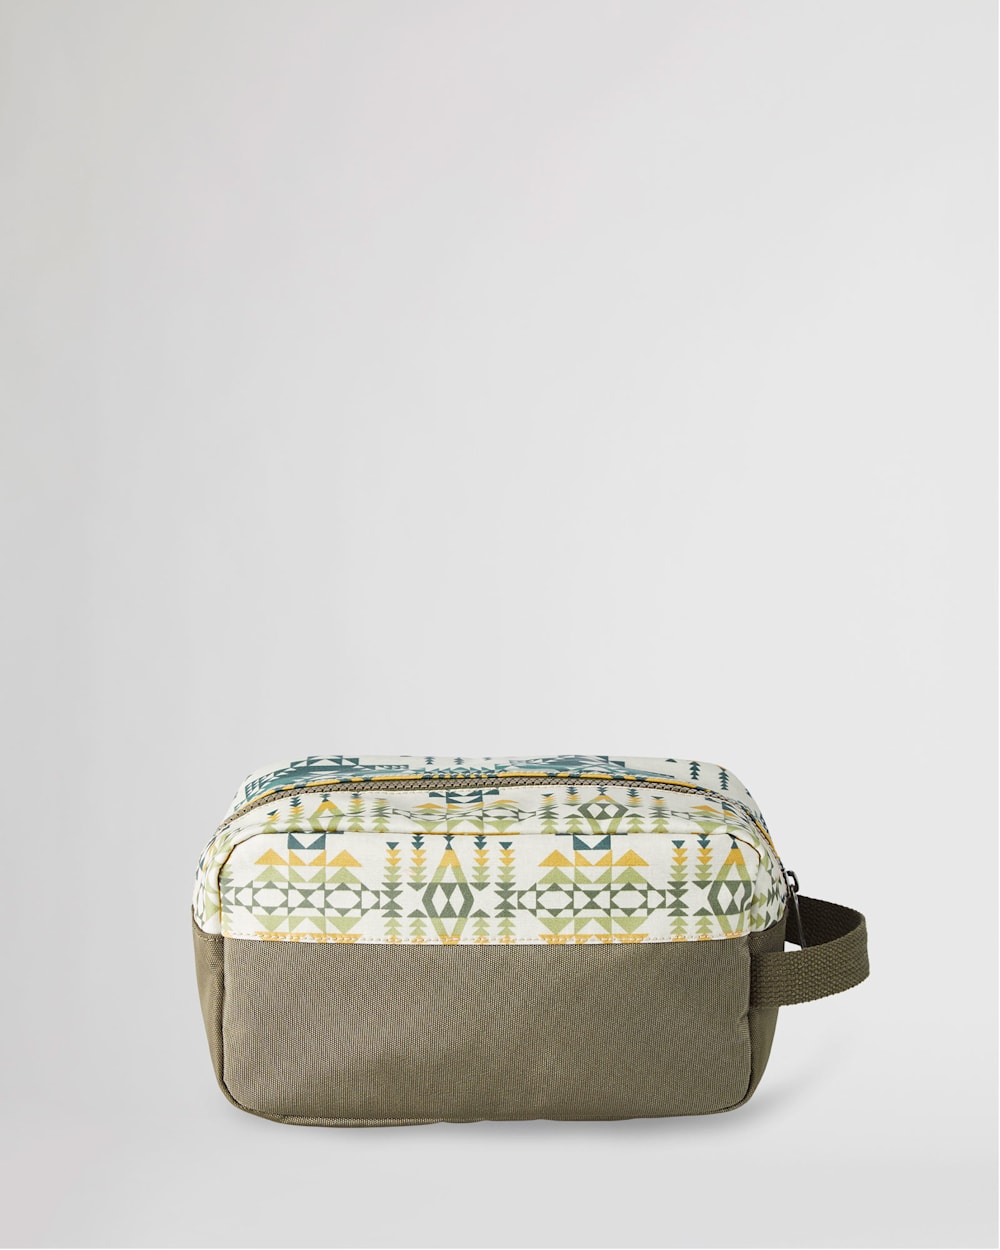 ALTERNATE VIEW OF PILOT ROCK CANOPY CANVAS CARRYALL POUCH IN OLIVE image number 2